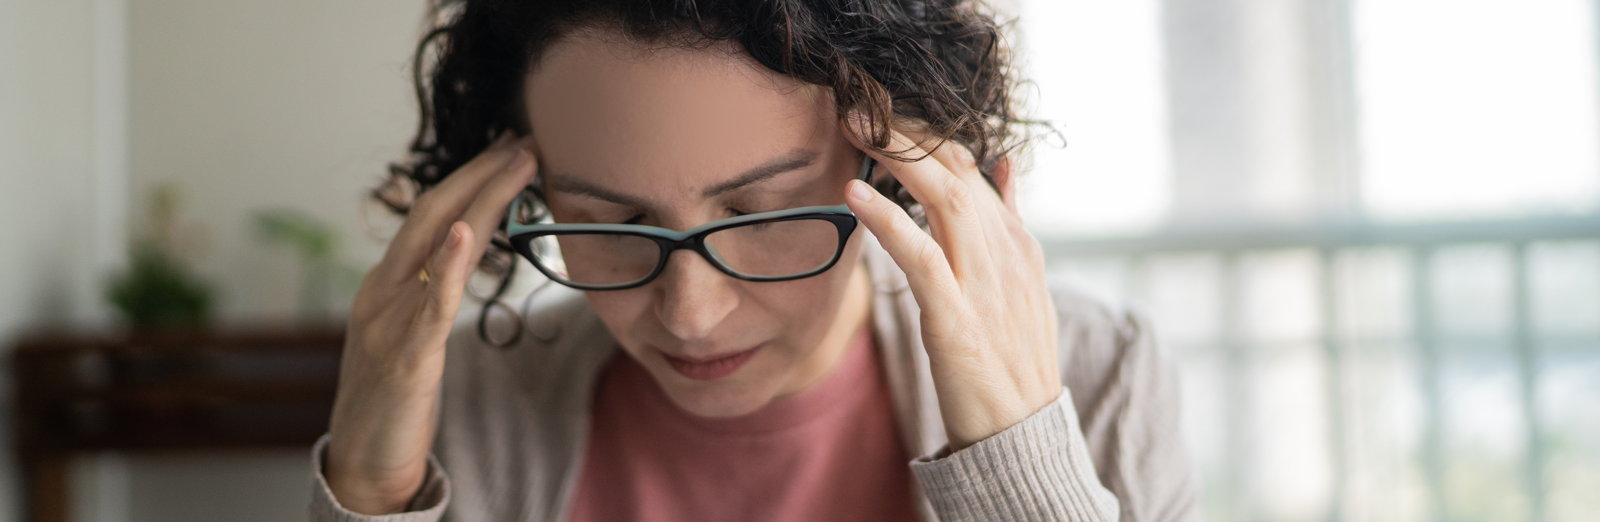 woman-with-glasses-thinking-1600x522-ALT.png